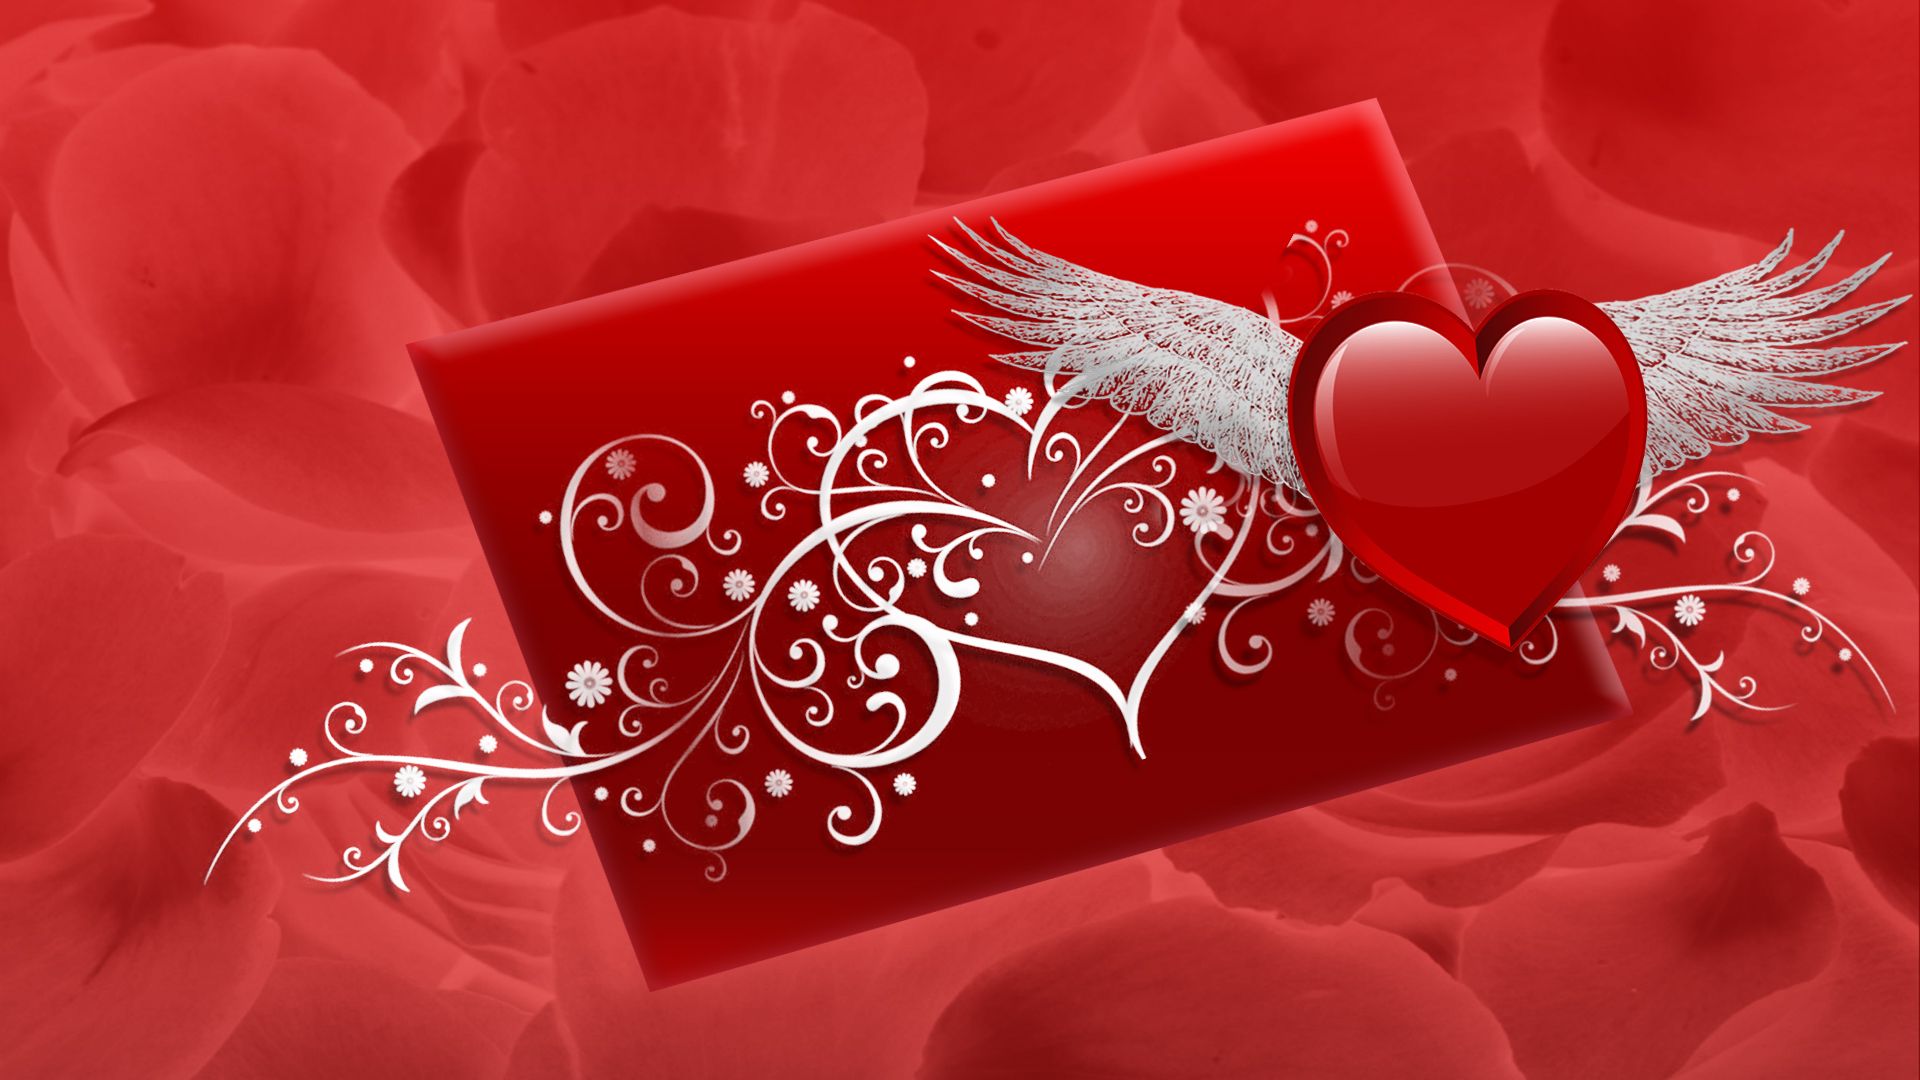 Free download VALENTINES DAY WALLPAPER 5 Author Love [1920x1080] for your Desktop, Mobile & Tablet. Explore Valentine Wallpaper Picture. Free Valentine Wallpaper Picture, Cartoon Valentine Wallpaper for Computer